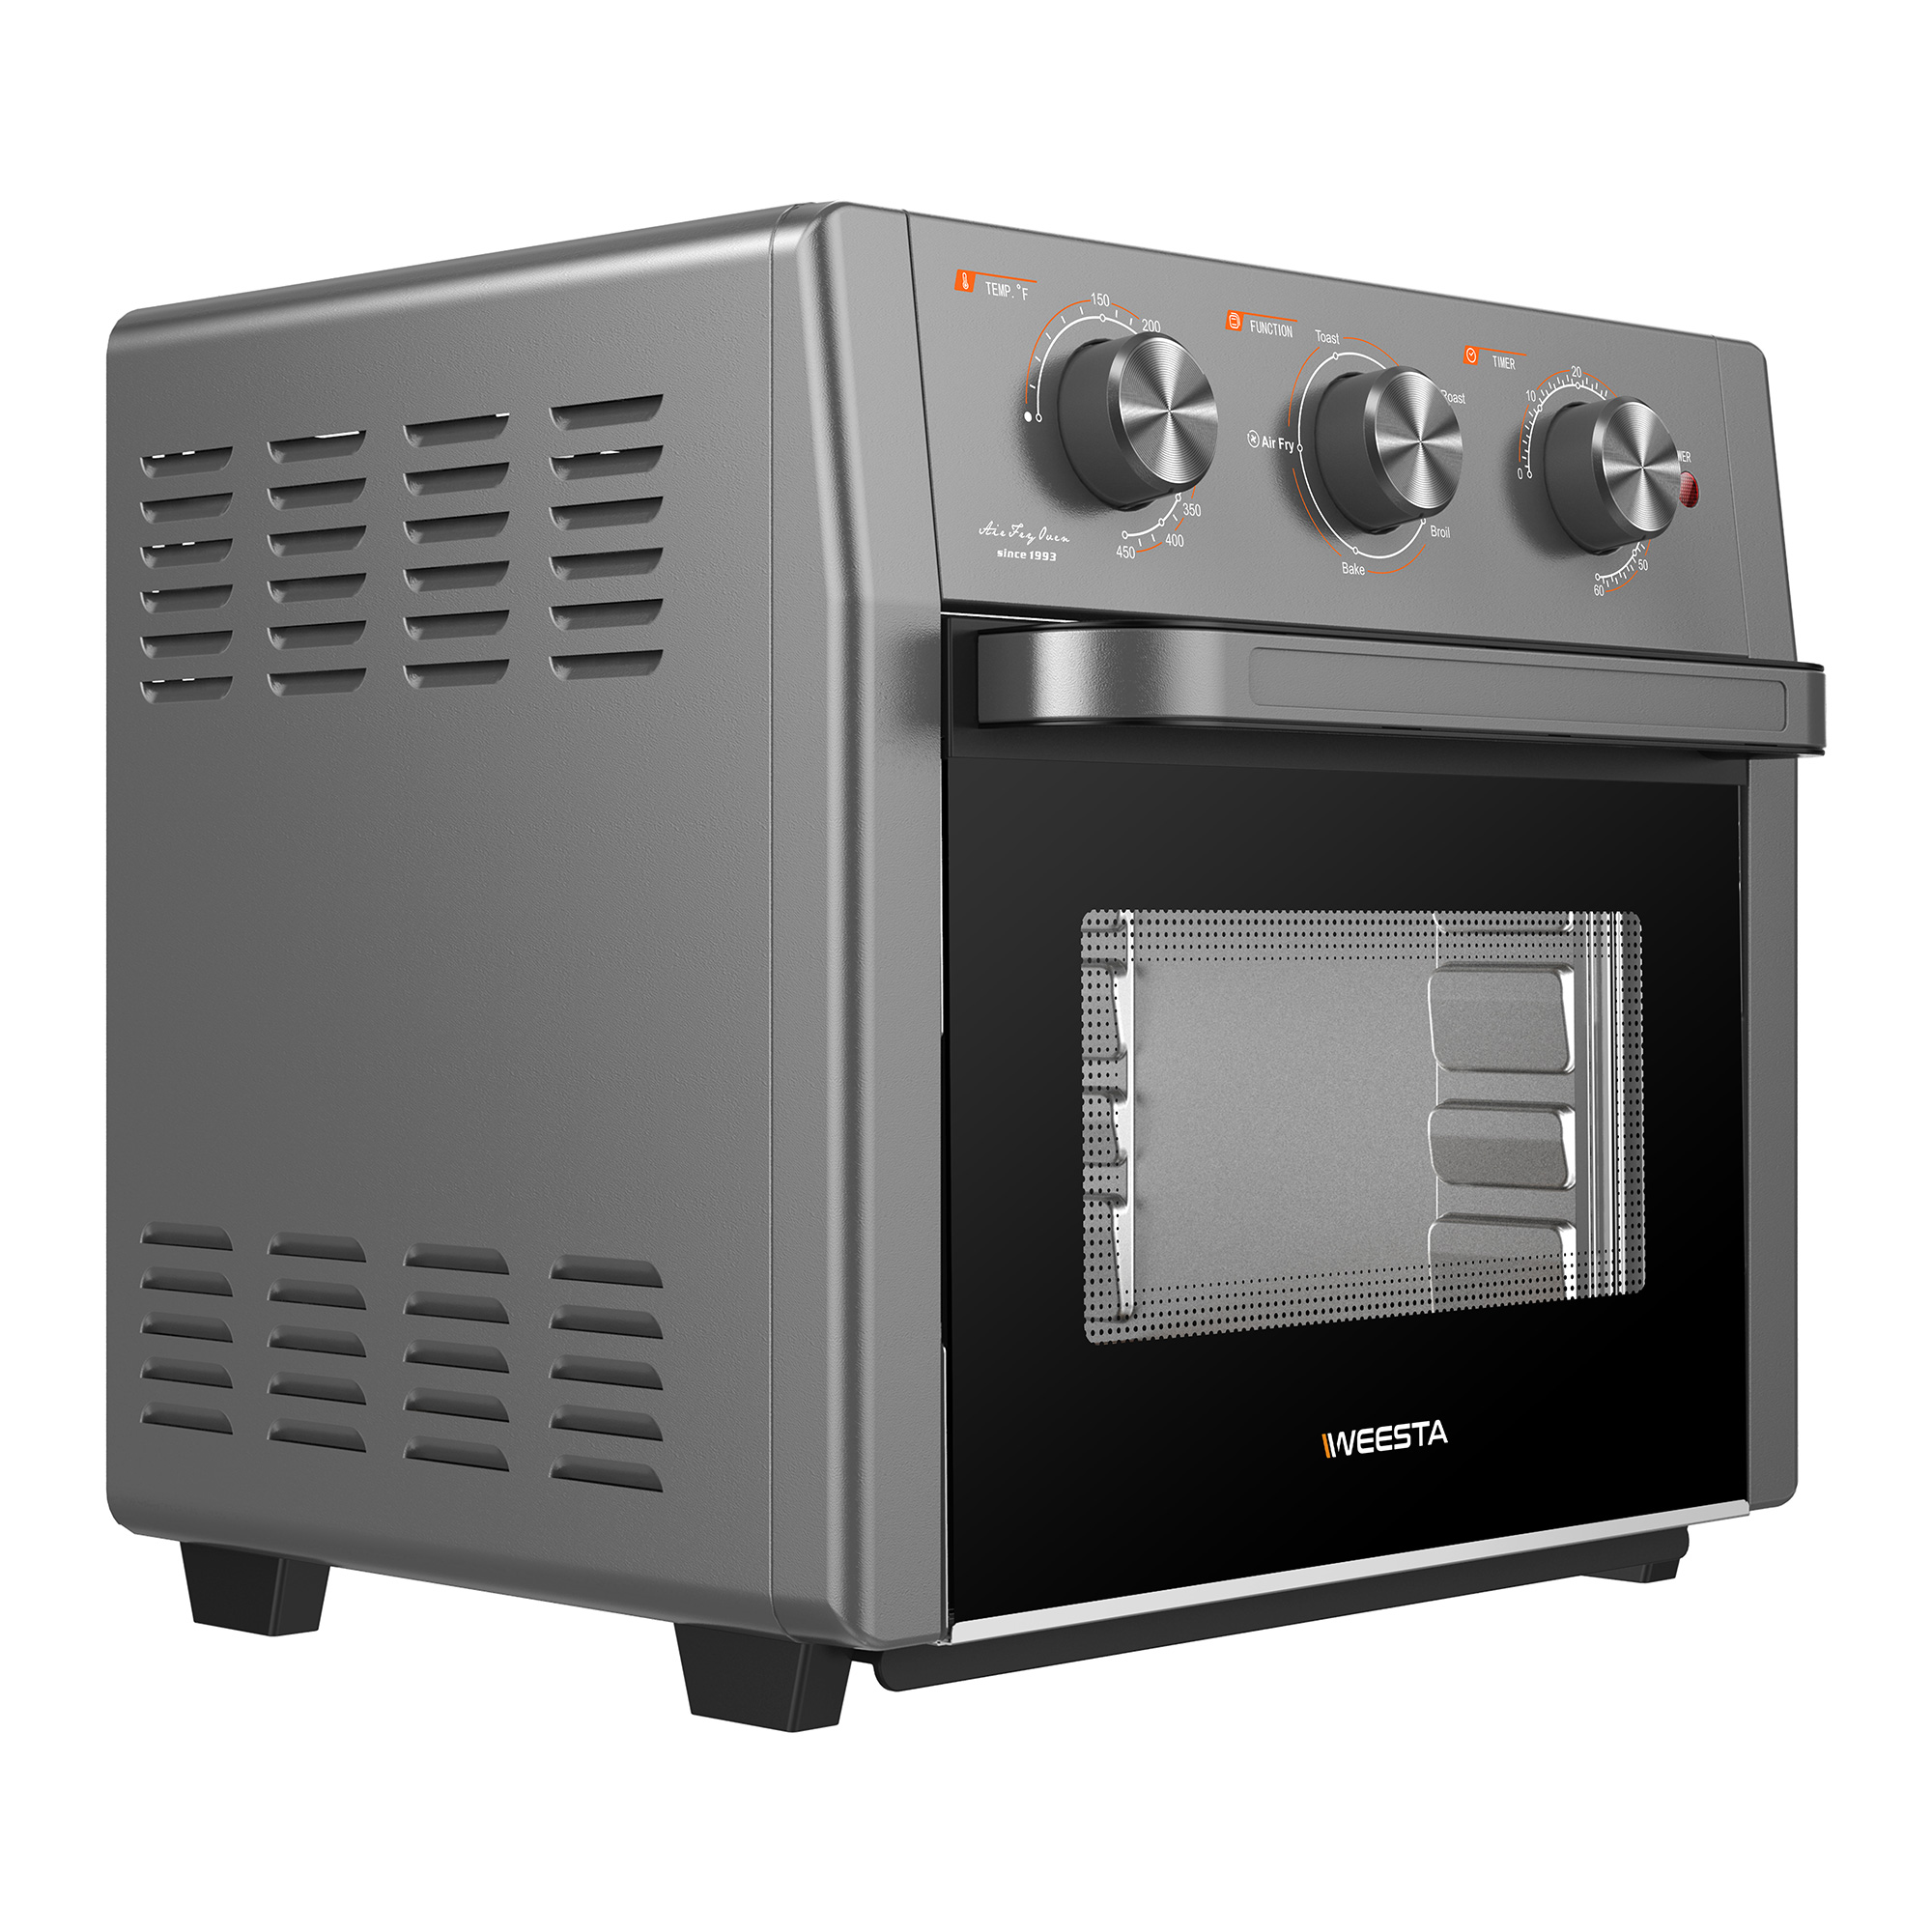 Bear QZG-A15V1 Air Fryer Oven 1500W 20L Multifunctional Toaster Oven Combo  for H Sale - Banggood USA Mobile-arrival notice